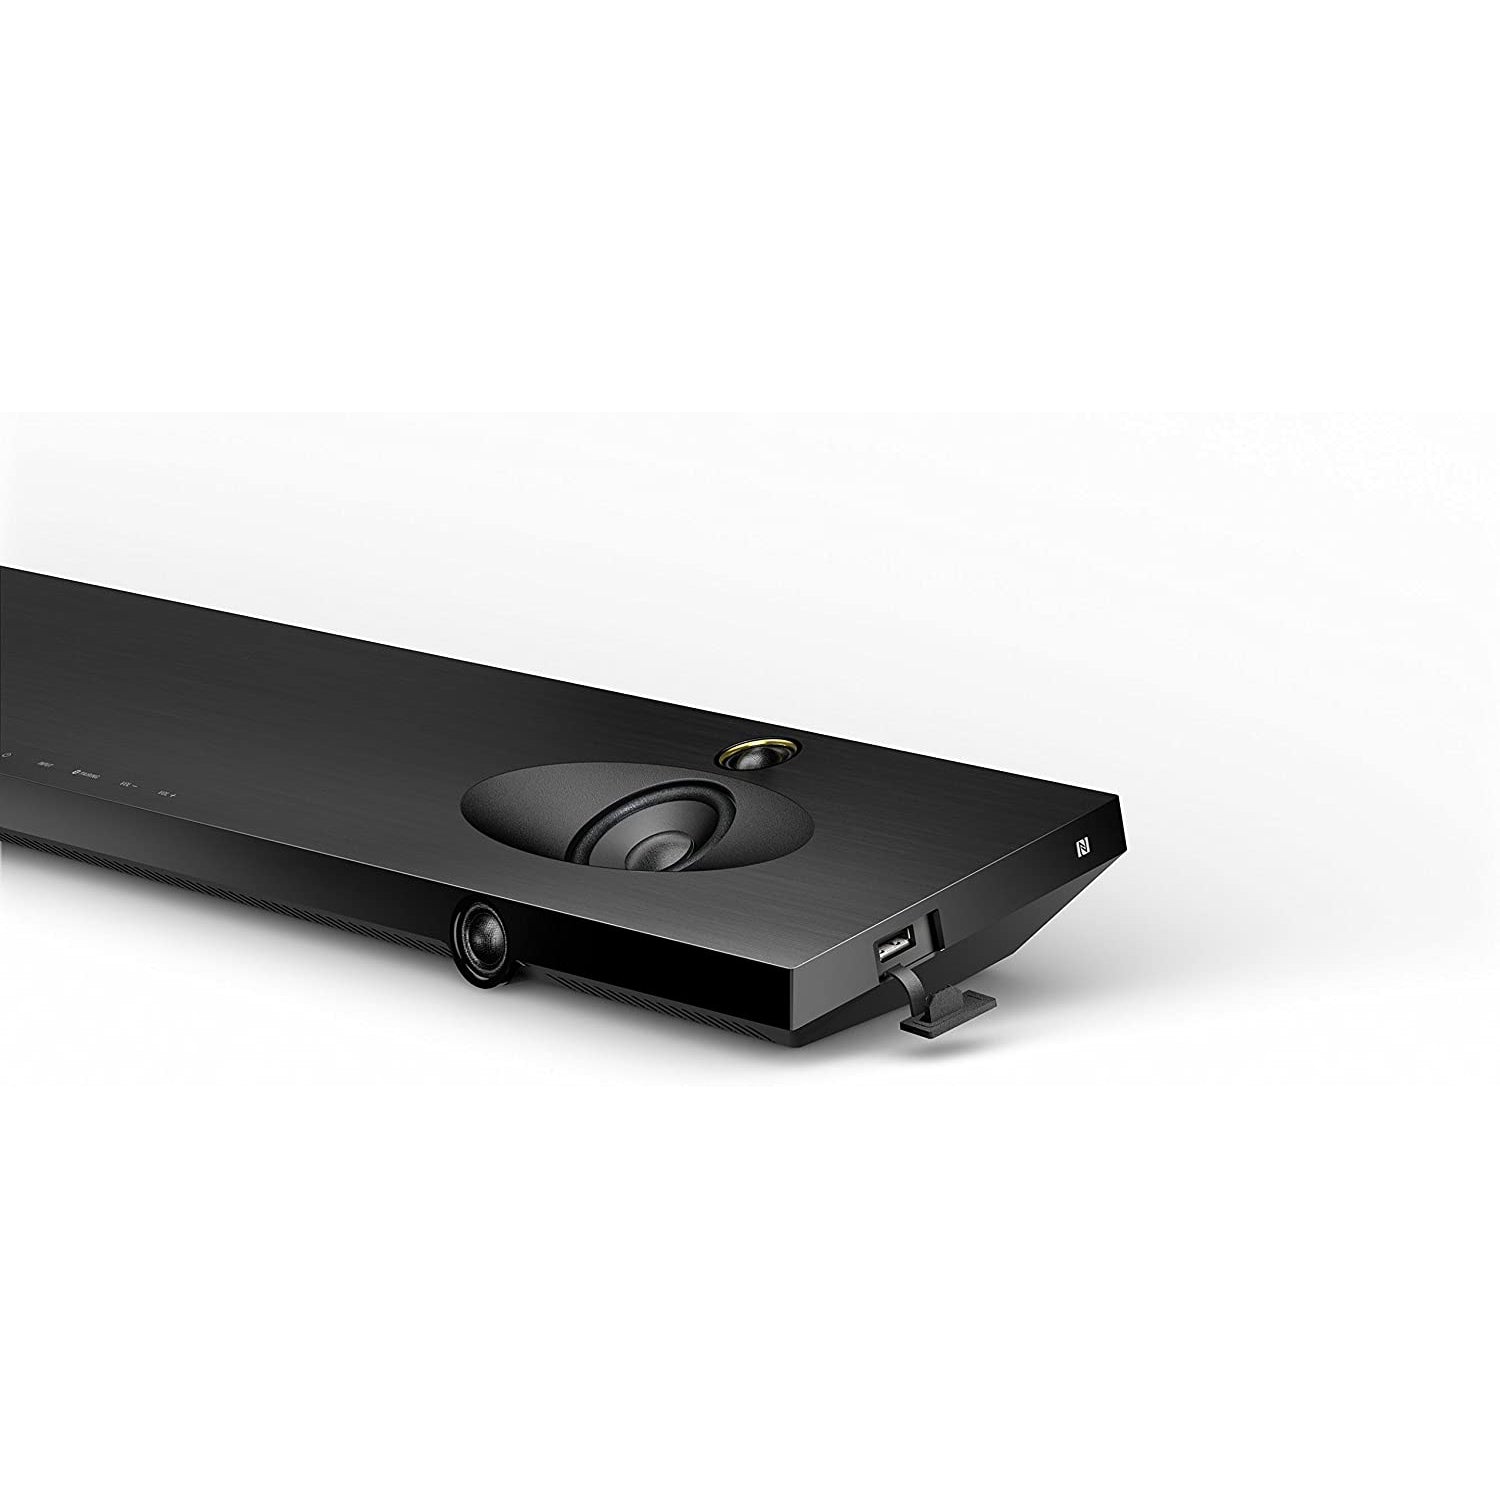 Sony HT-NT5 400 W Sound Bar with High-Resolution Audio and 4K Pass-Through - Black *Sound Bar Only*